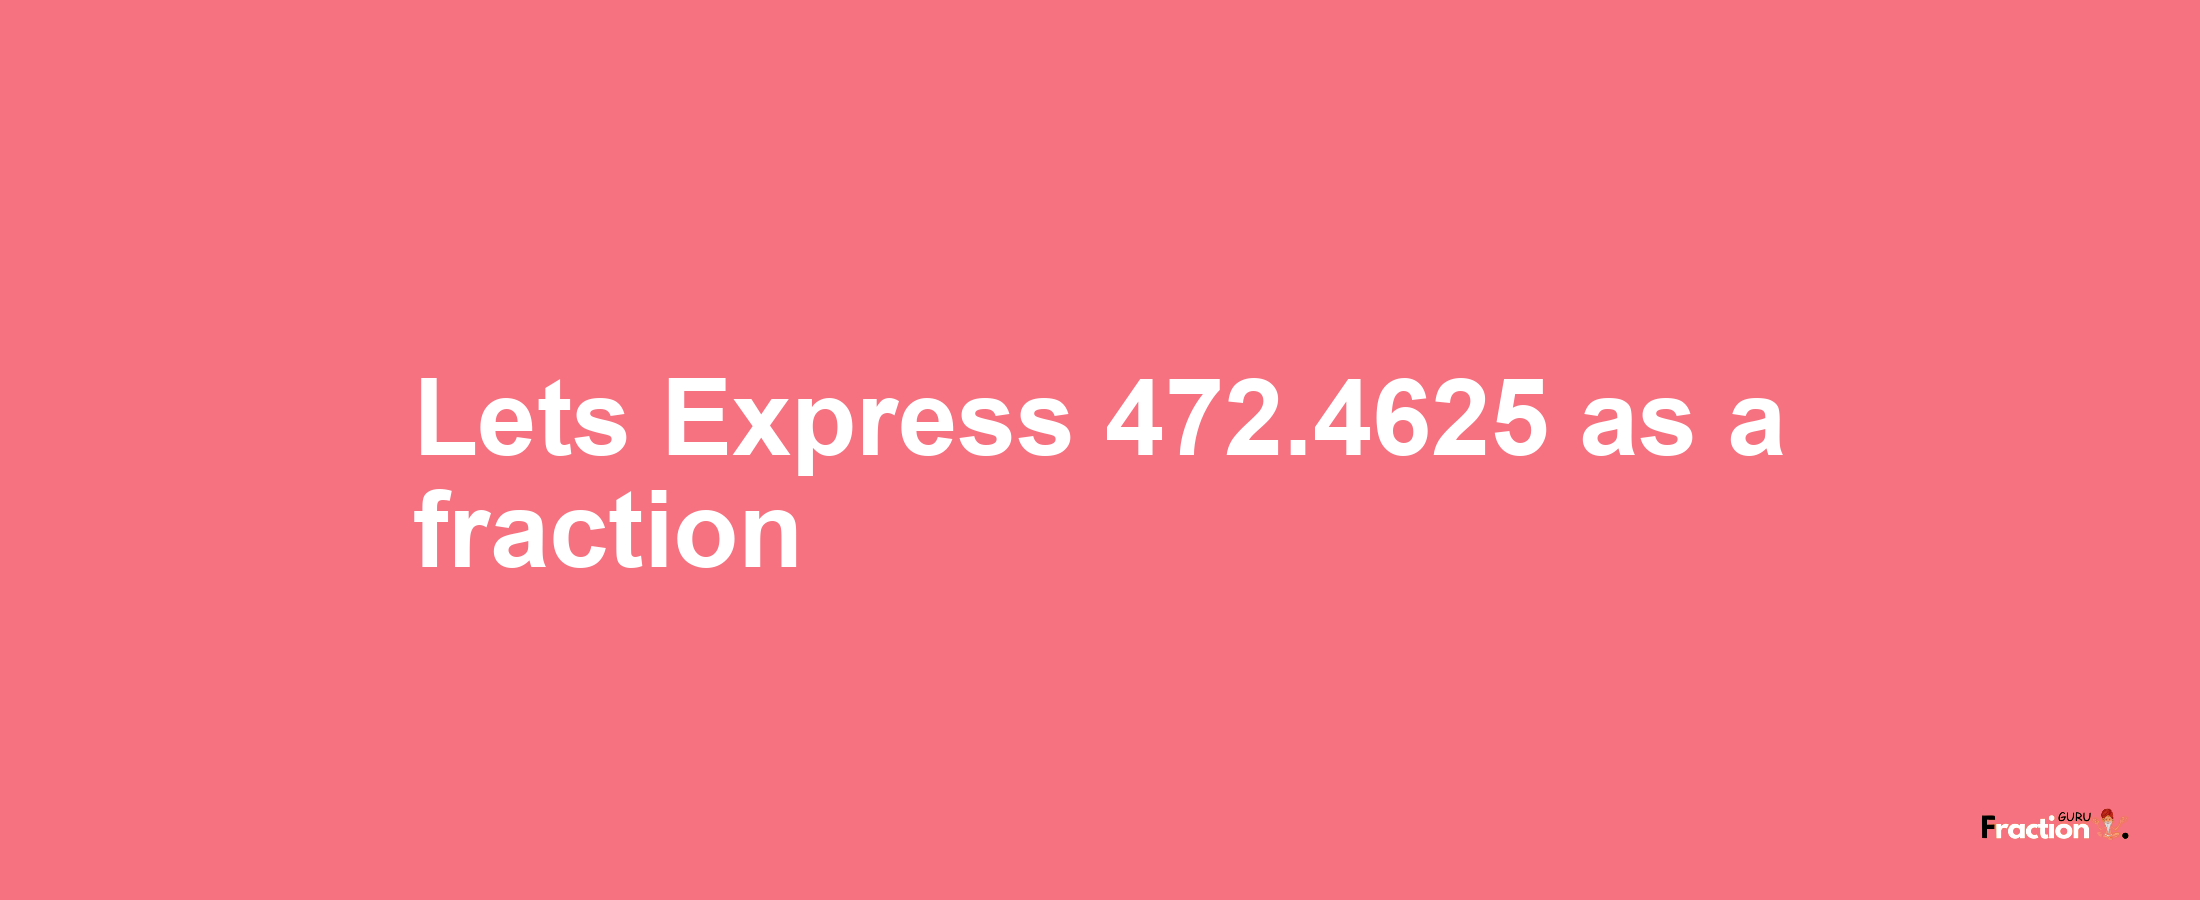 Lets Express 472.4625 as afraction